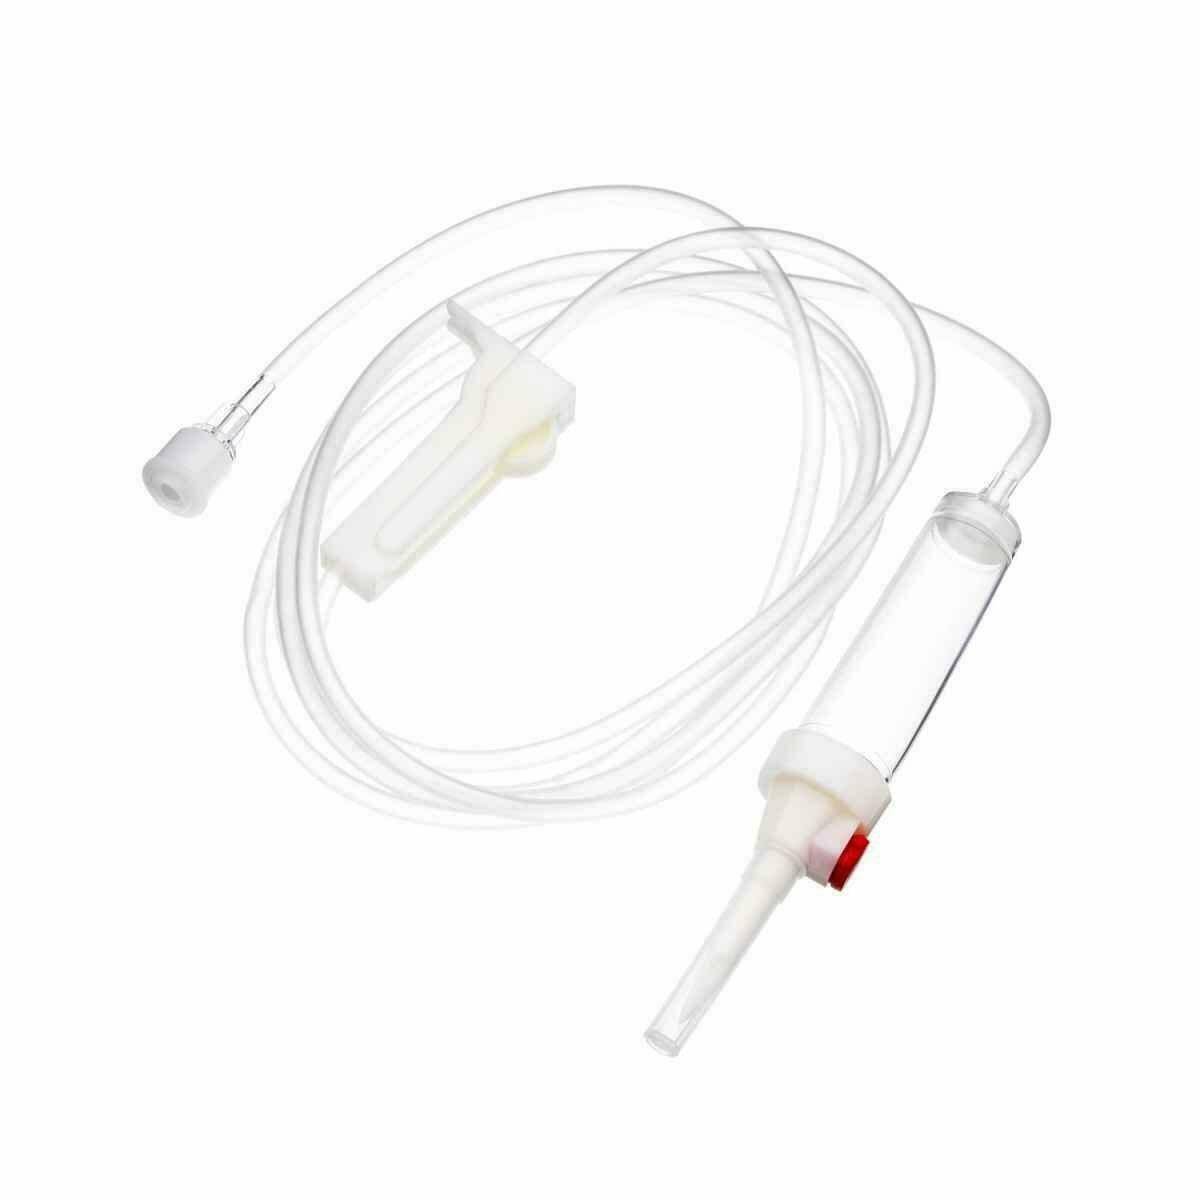 BD Infusion Set for Gravity Infusion with Luer Lock Connector and Check Valve - UKMEDI